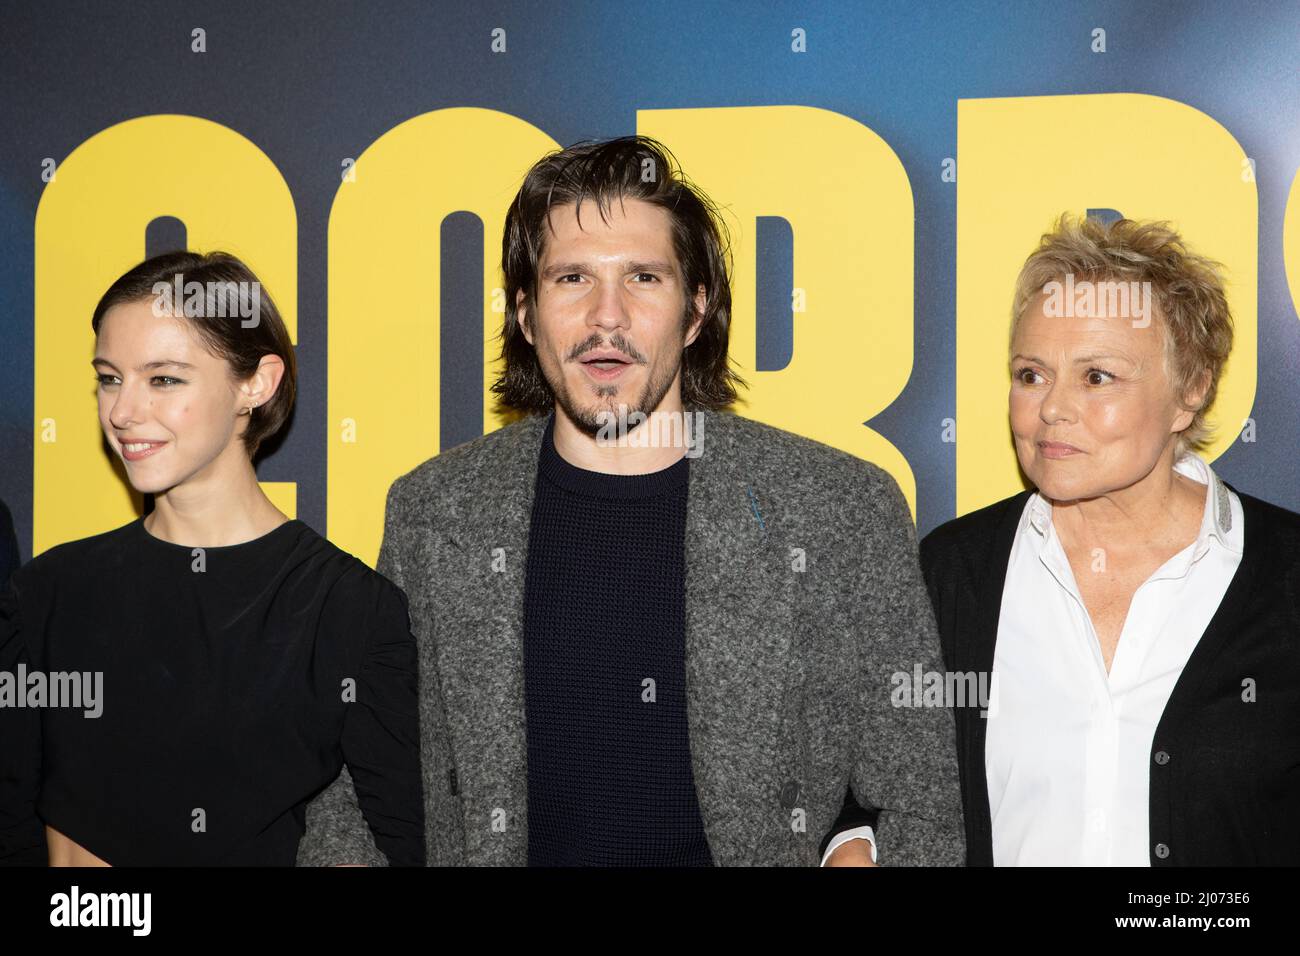 Paris, France, the 16th March 2022, the actresses Marion Barbeau, Muriel Robin and the actor François Civil at the preview of Cedric Klapisch's film En Corps, François Loock/Alamy Credit: Loock françois/Alamy Live News Stock Photo